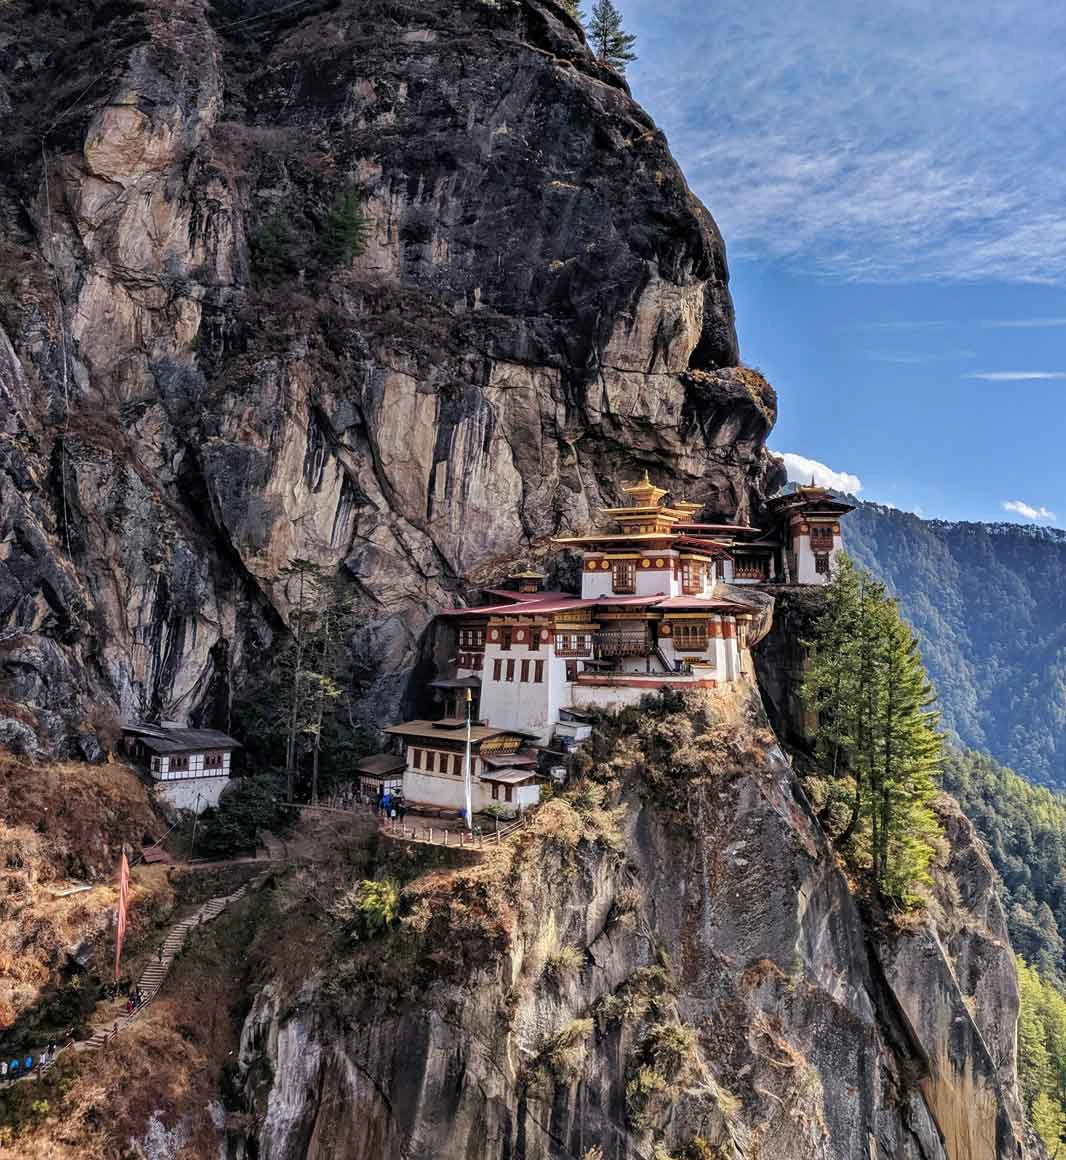 Hiking to Tiger's Nest Monastery in Bhutan